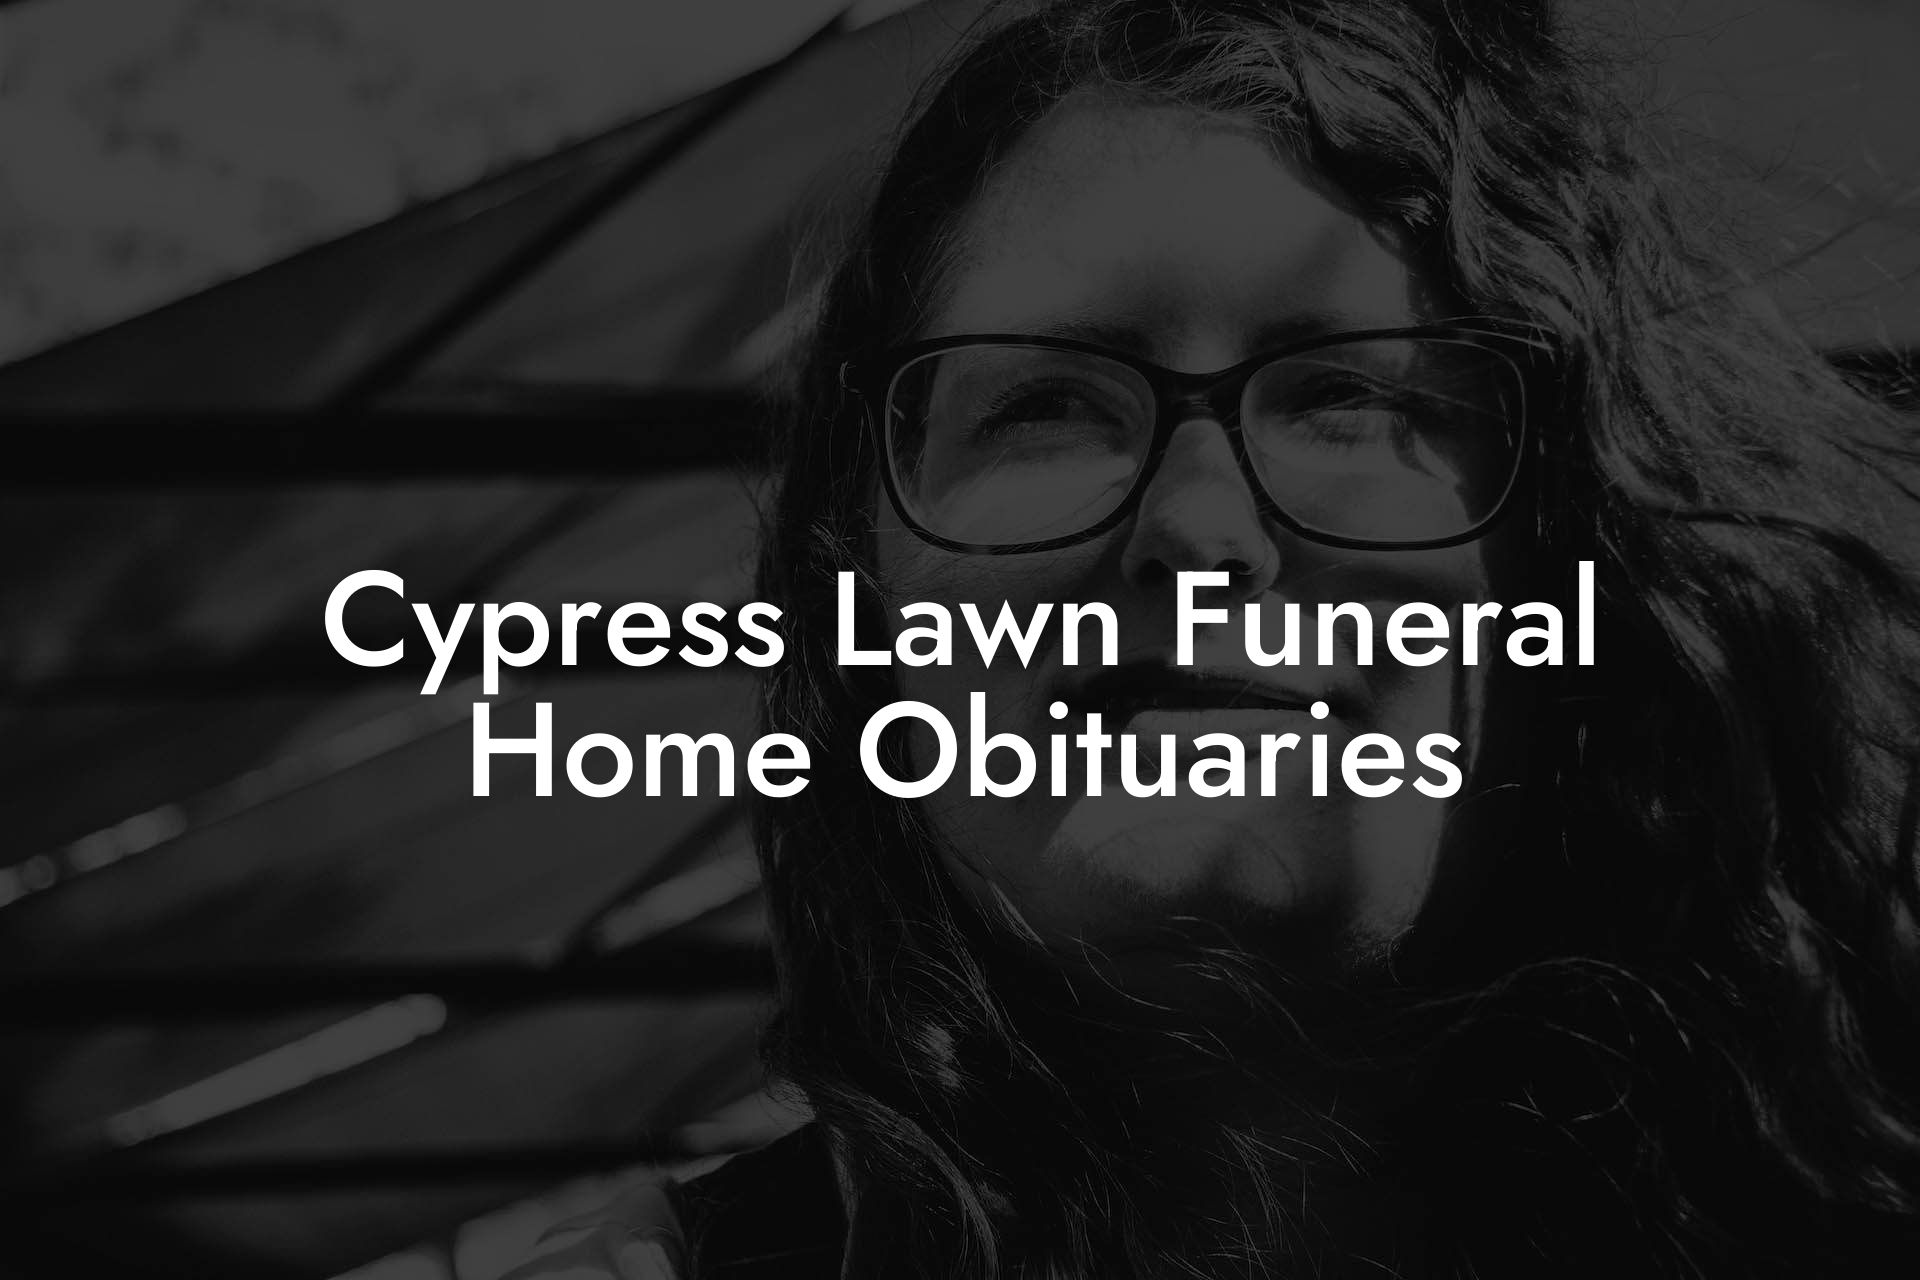 Cypress Lawn Funeral Home Obituaries